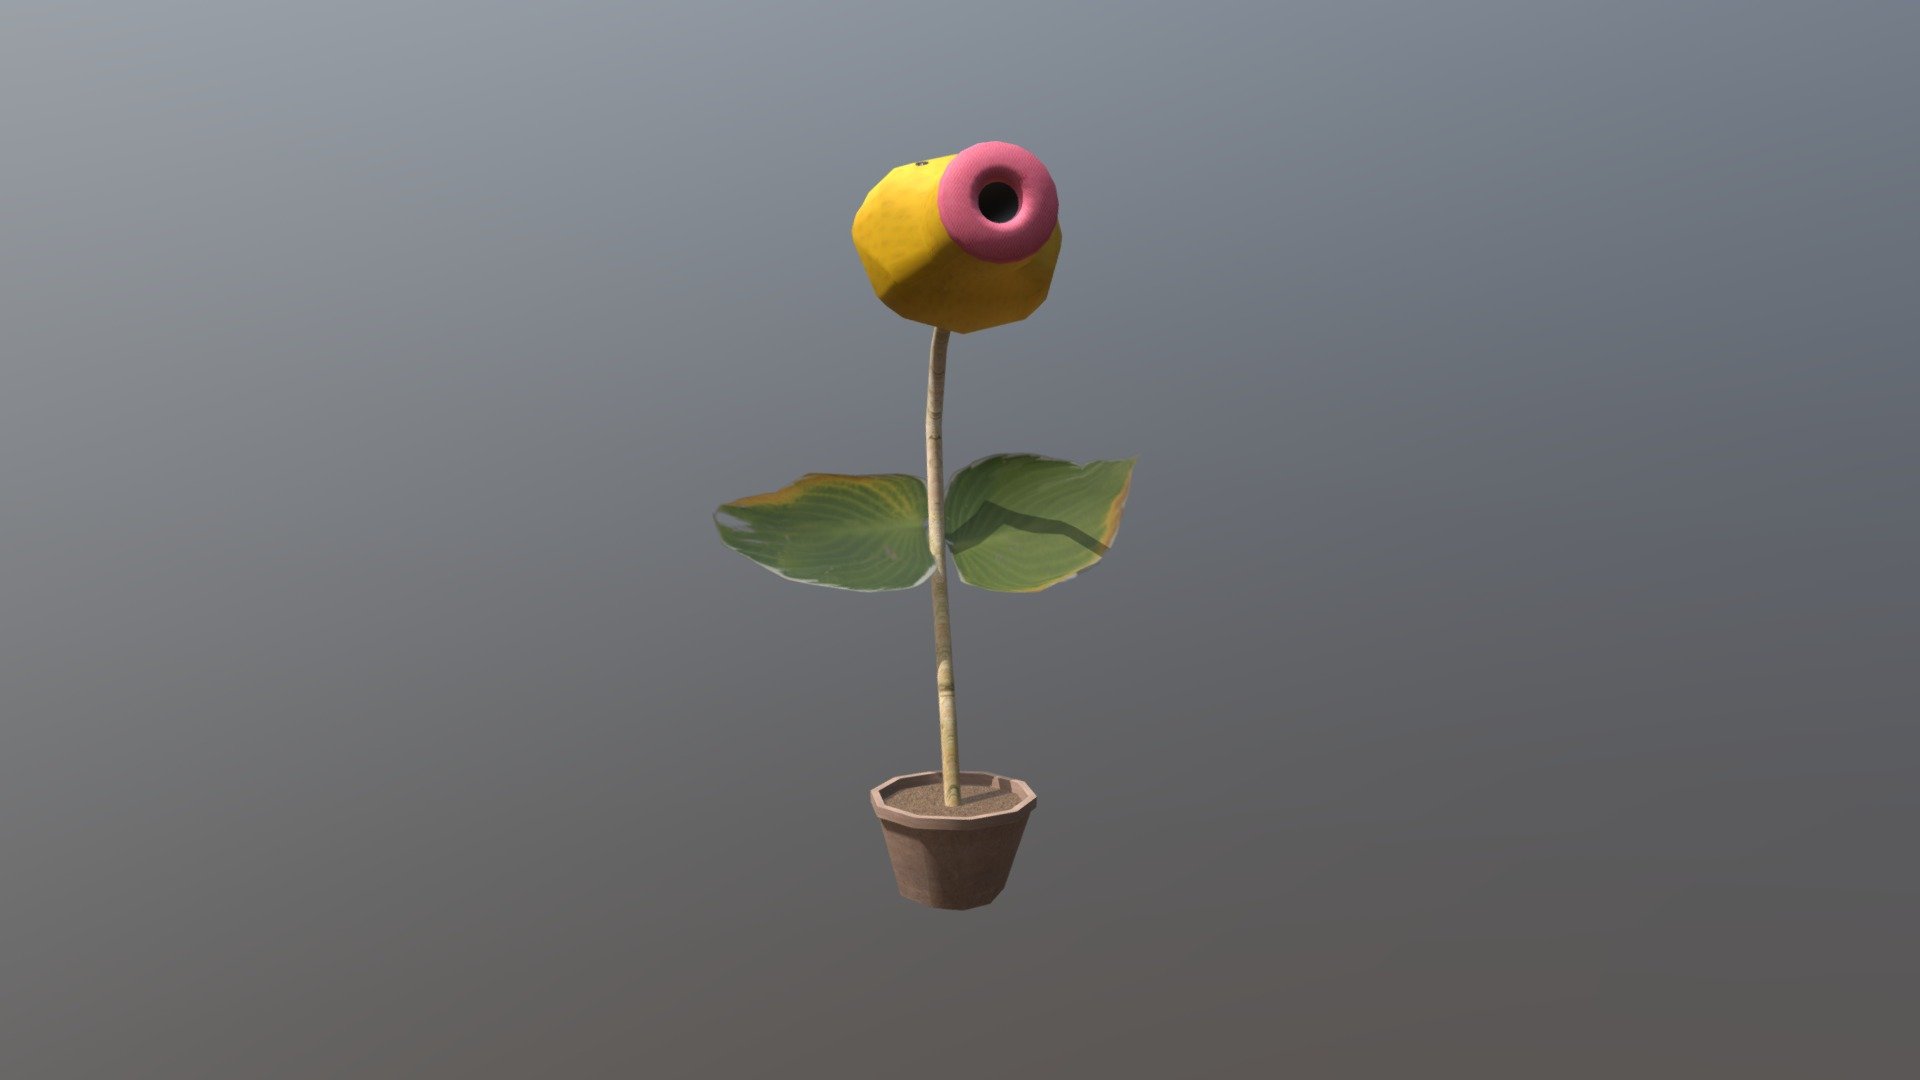 Project Bellsprout